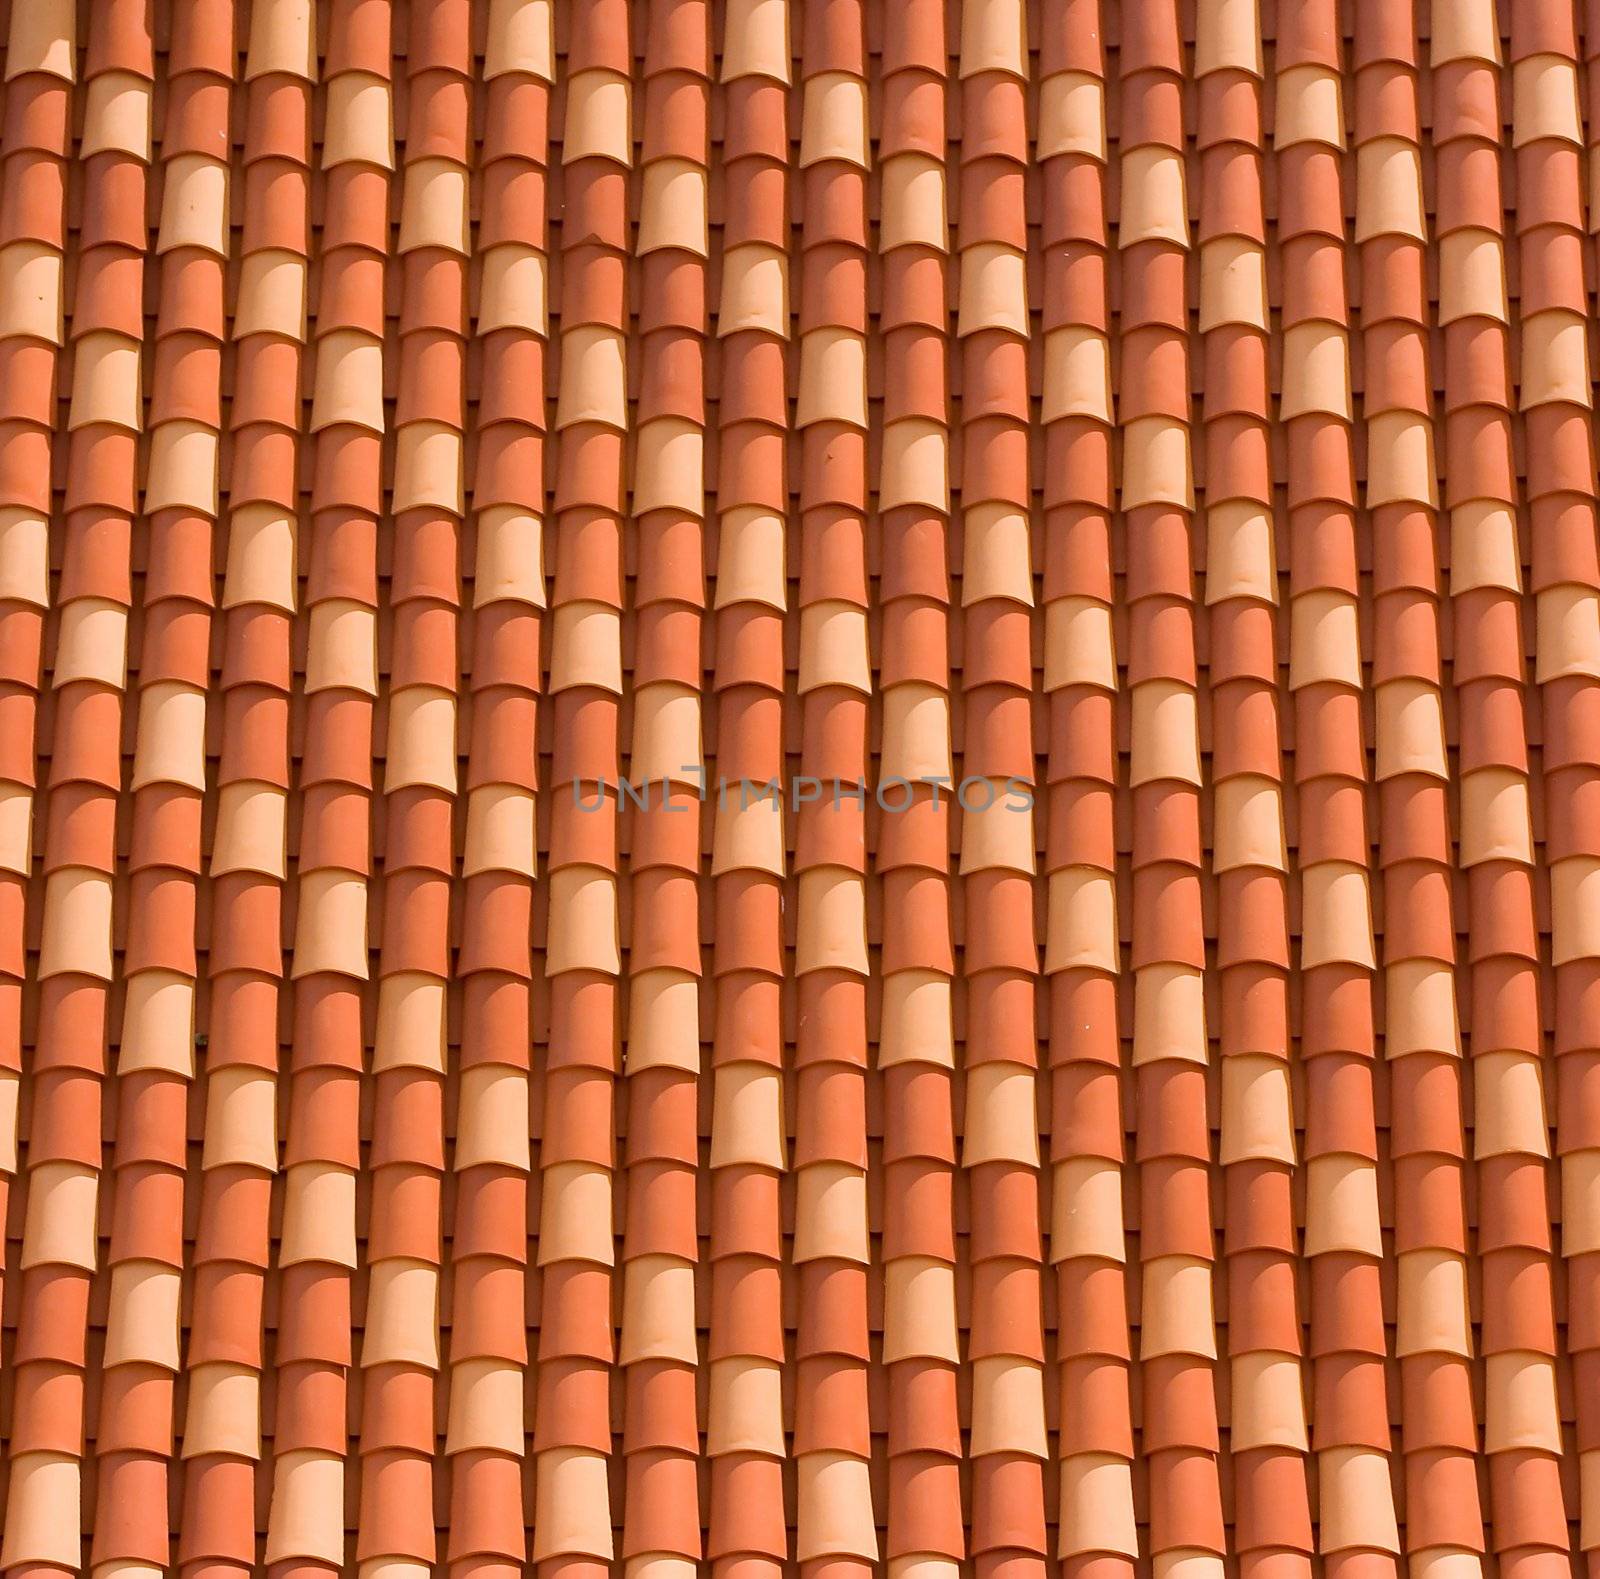 Typical red roof in Dubrovnik city